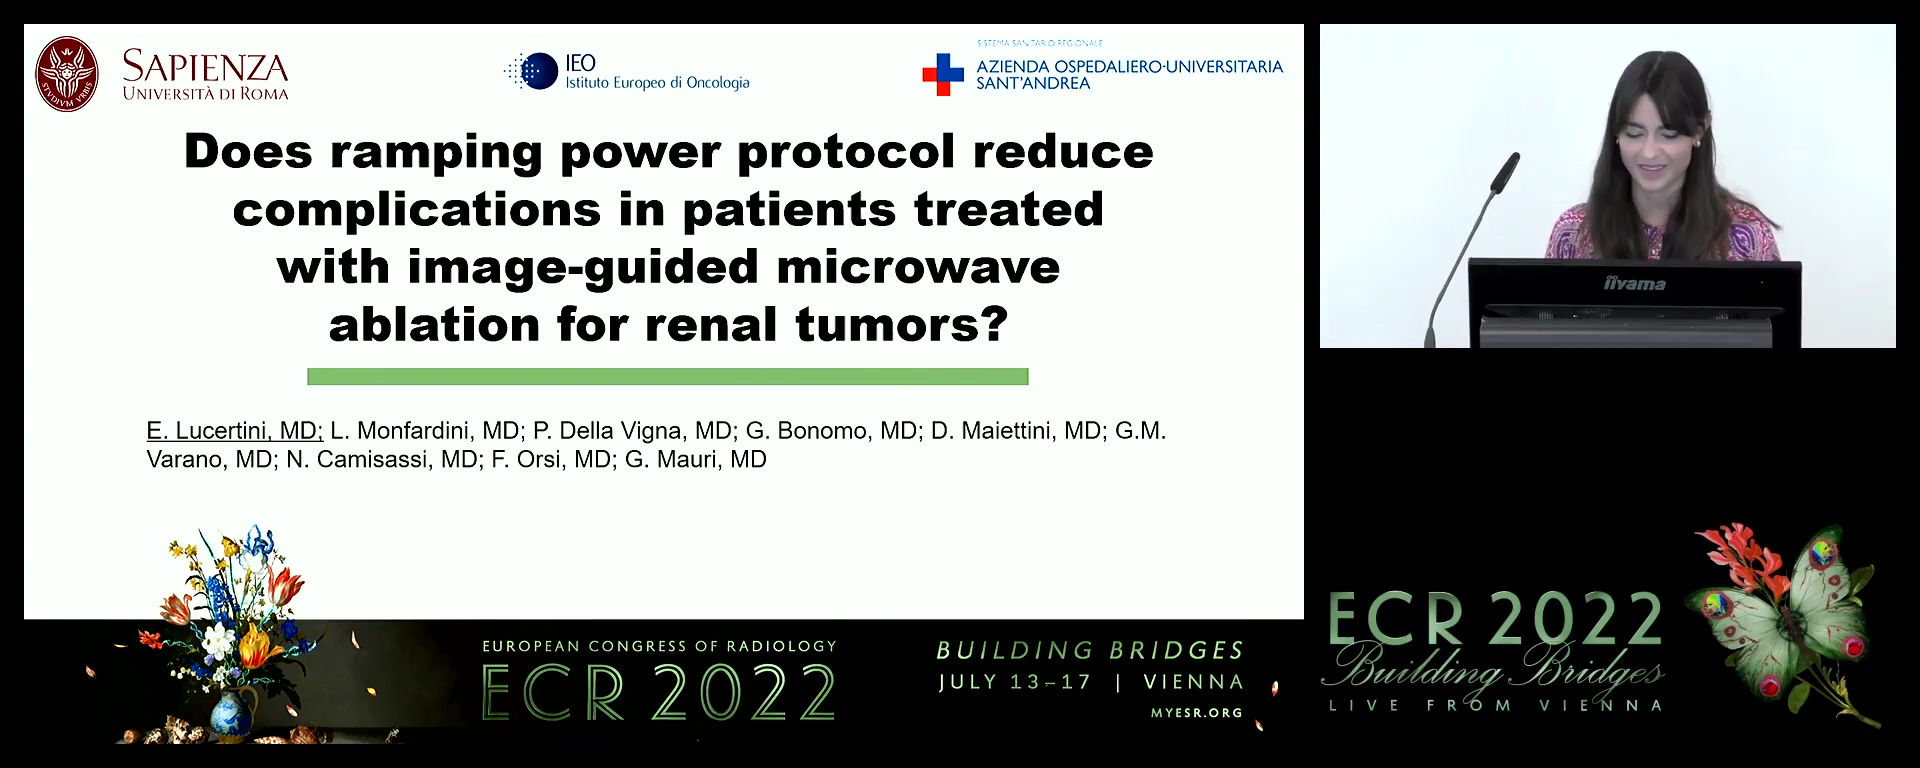 Does ramping power protocol reduce complications in patients treated with image-guided microwave ablation for renal tumours? - Elena Lucertini, Rome / IT